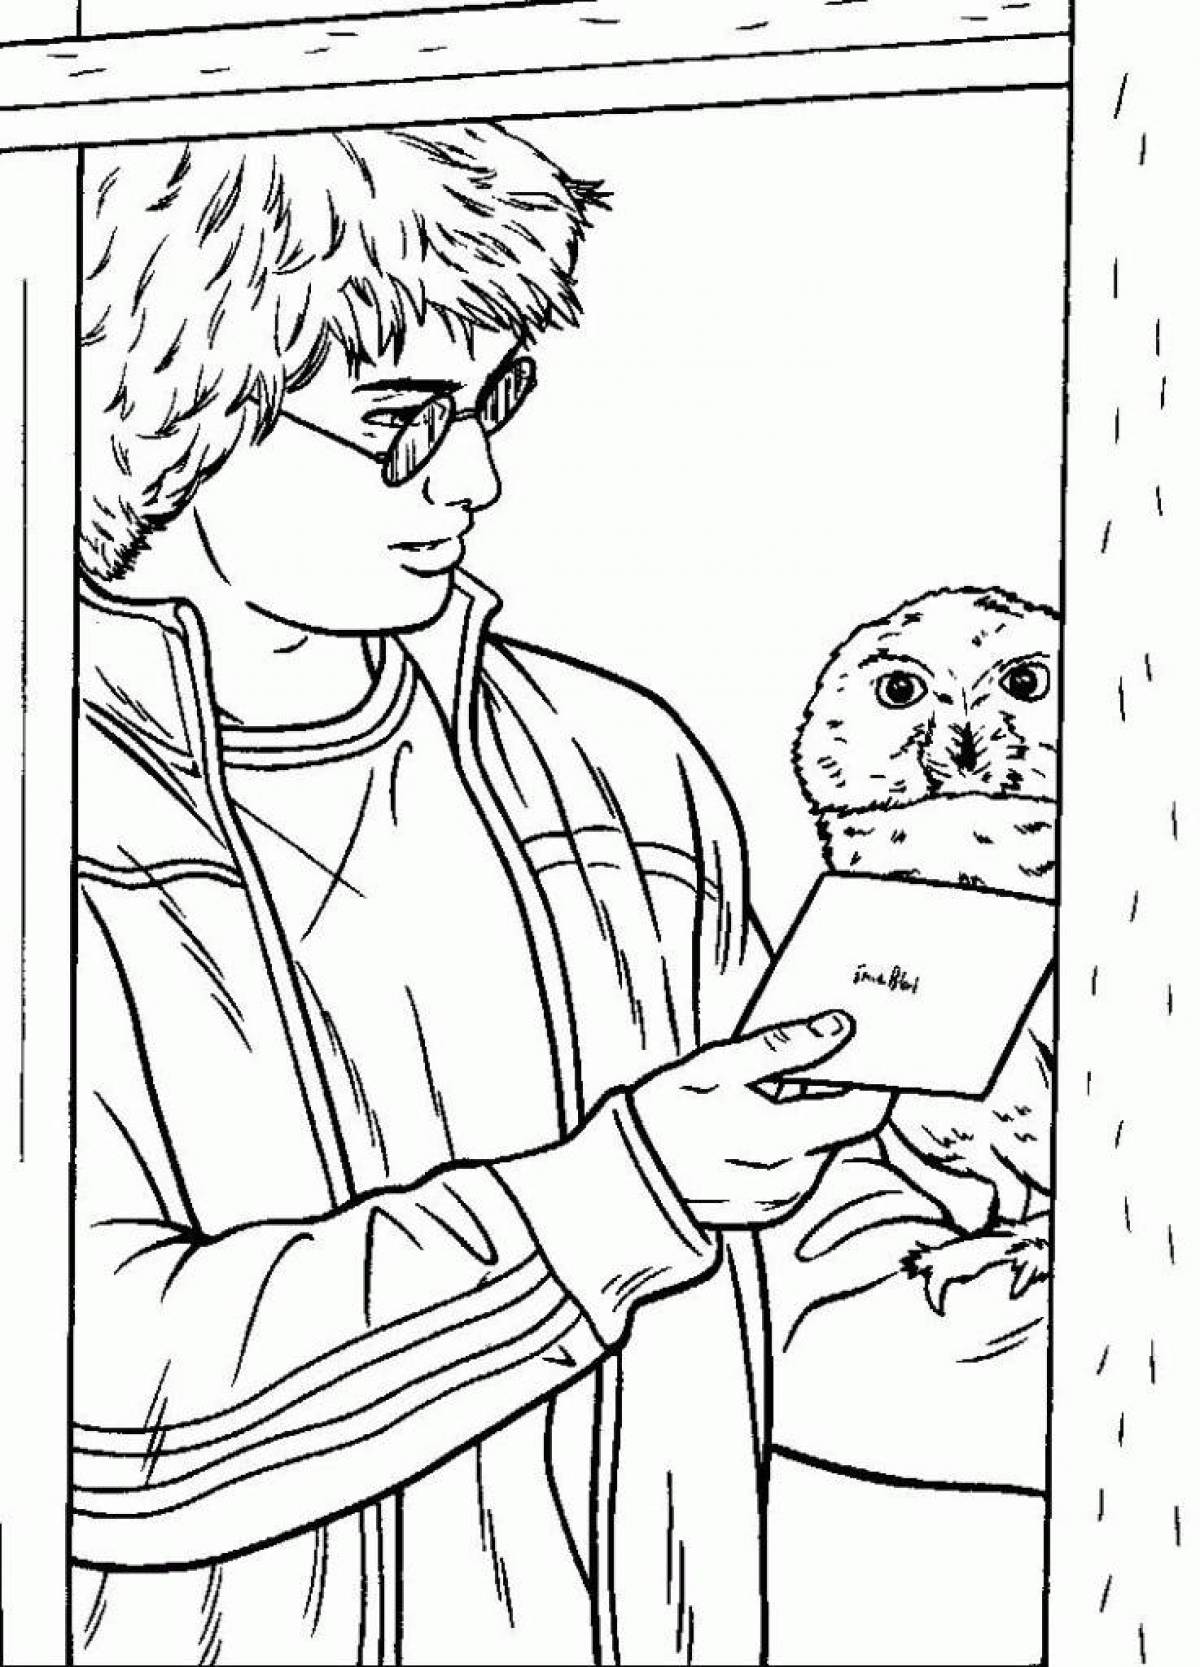 Charming harry potter coloring book for kids